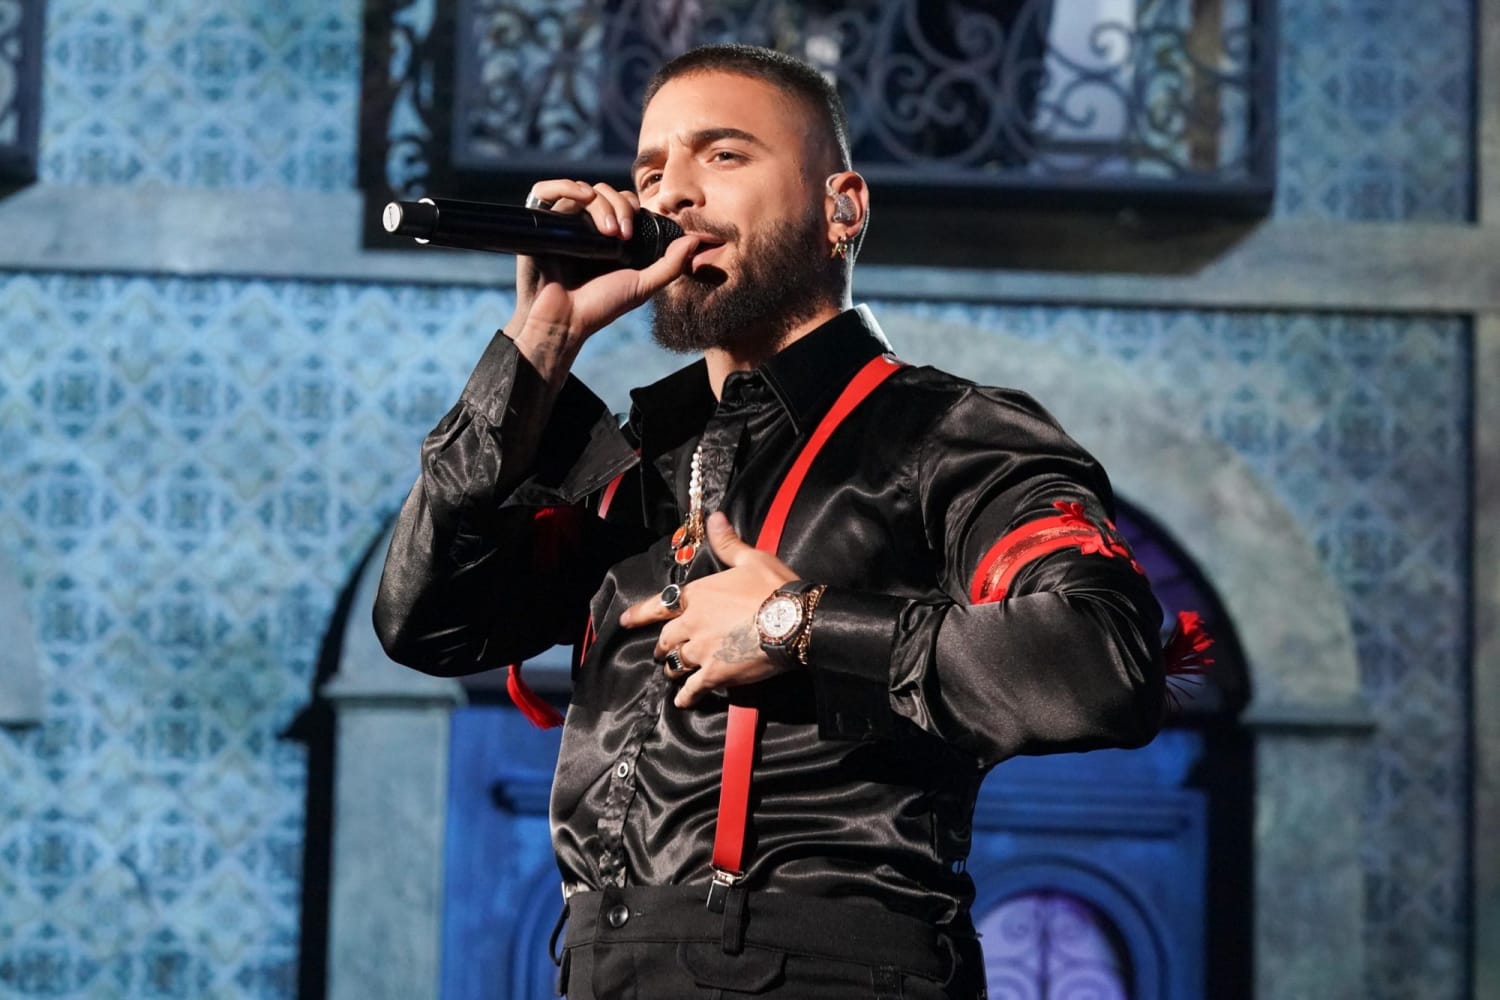 Latin music superstar Maluma teases challenging rise to the top in YouTube documentary trailer